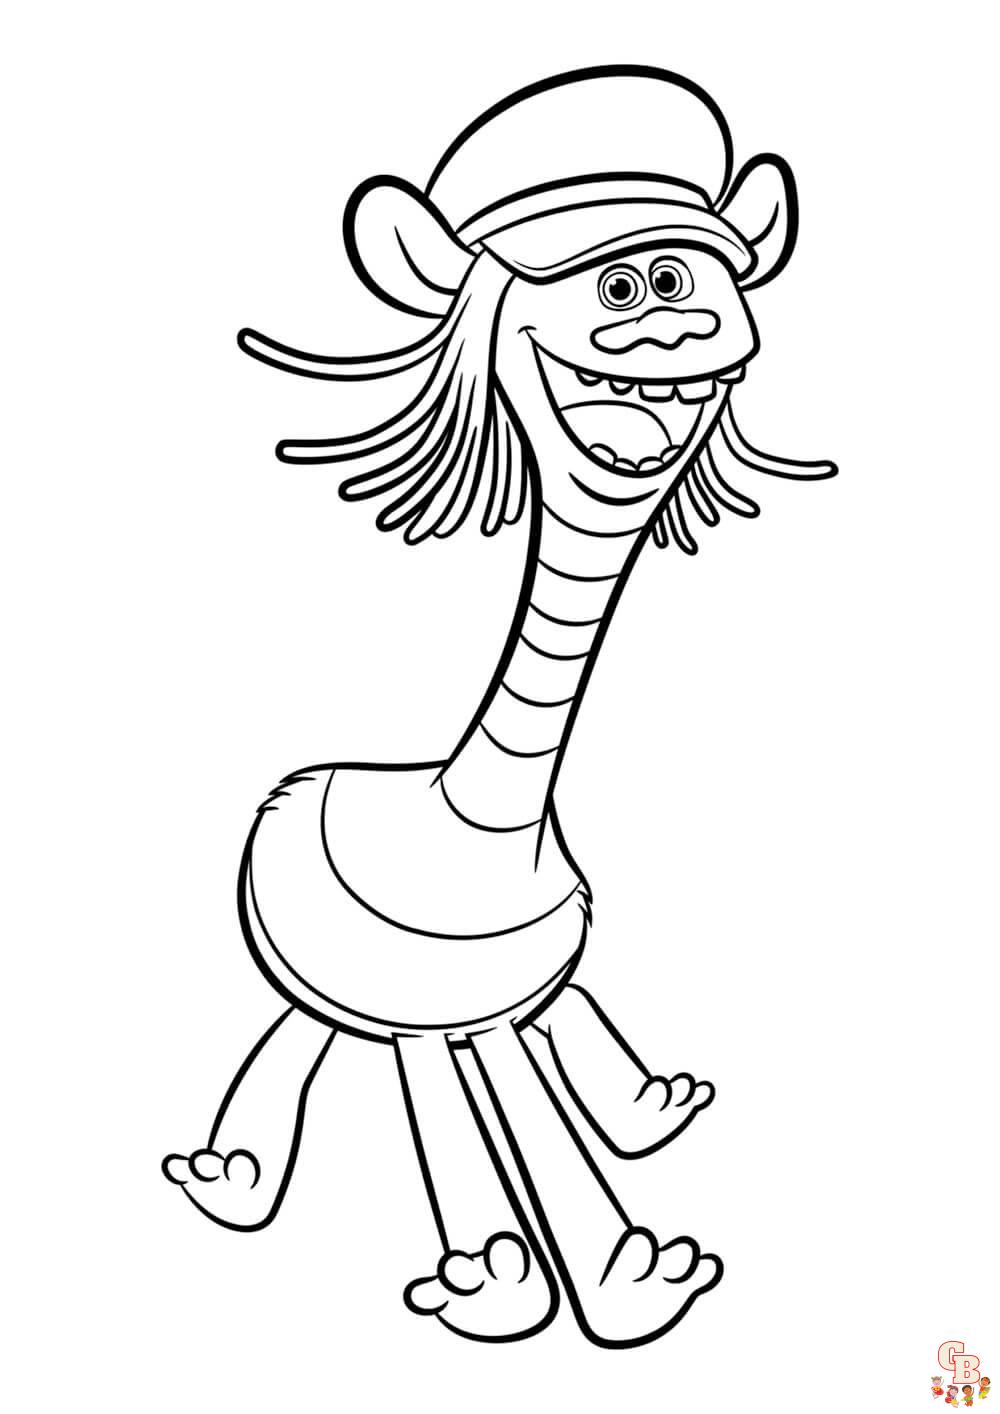 Cooper coloring pages